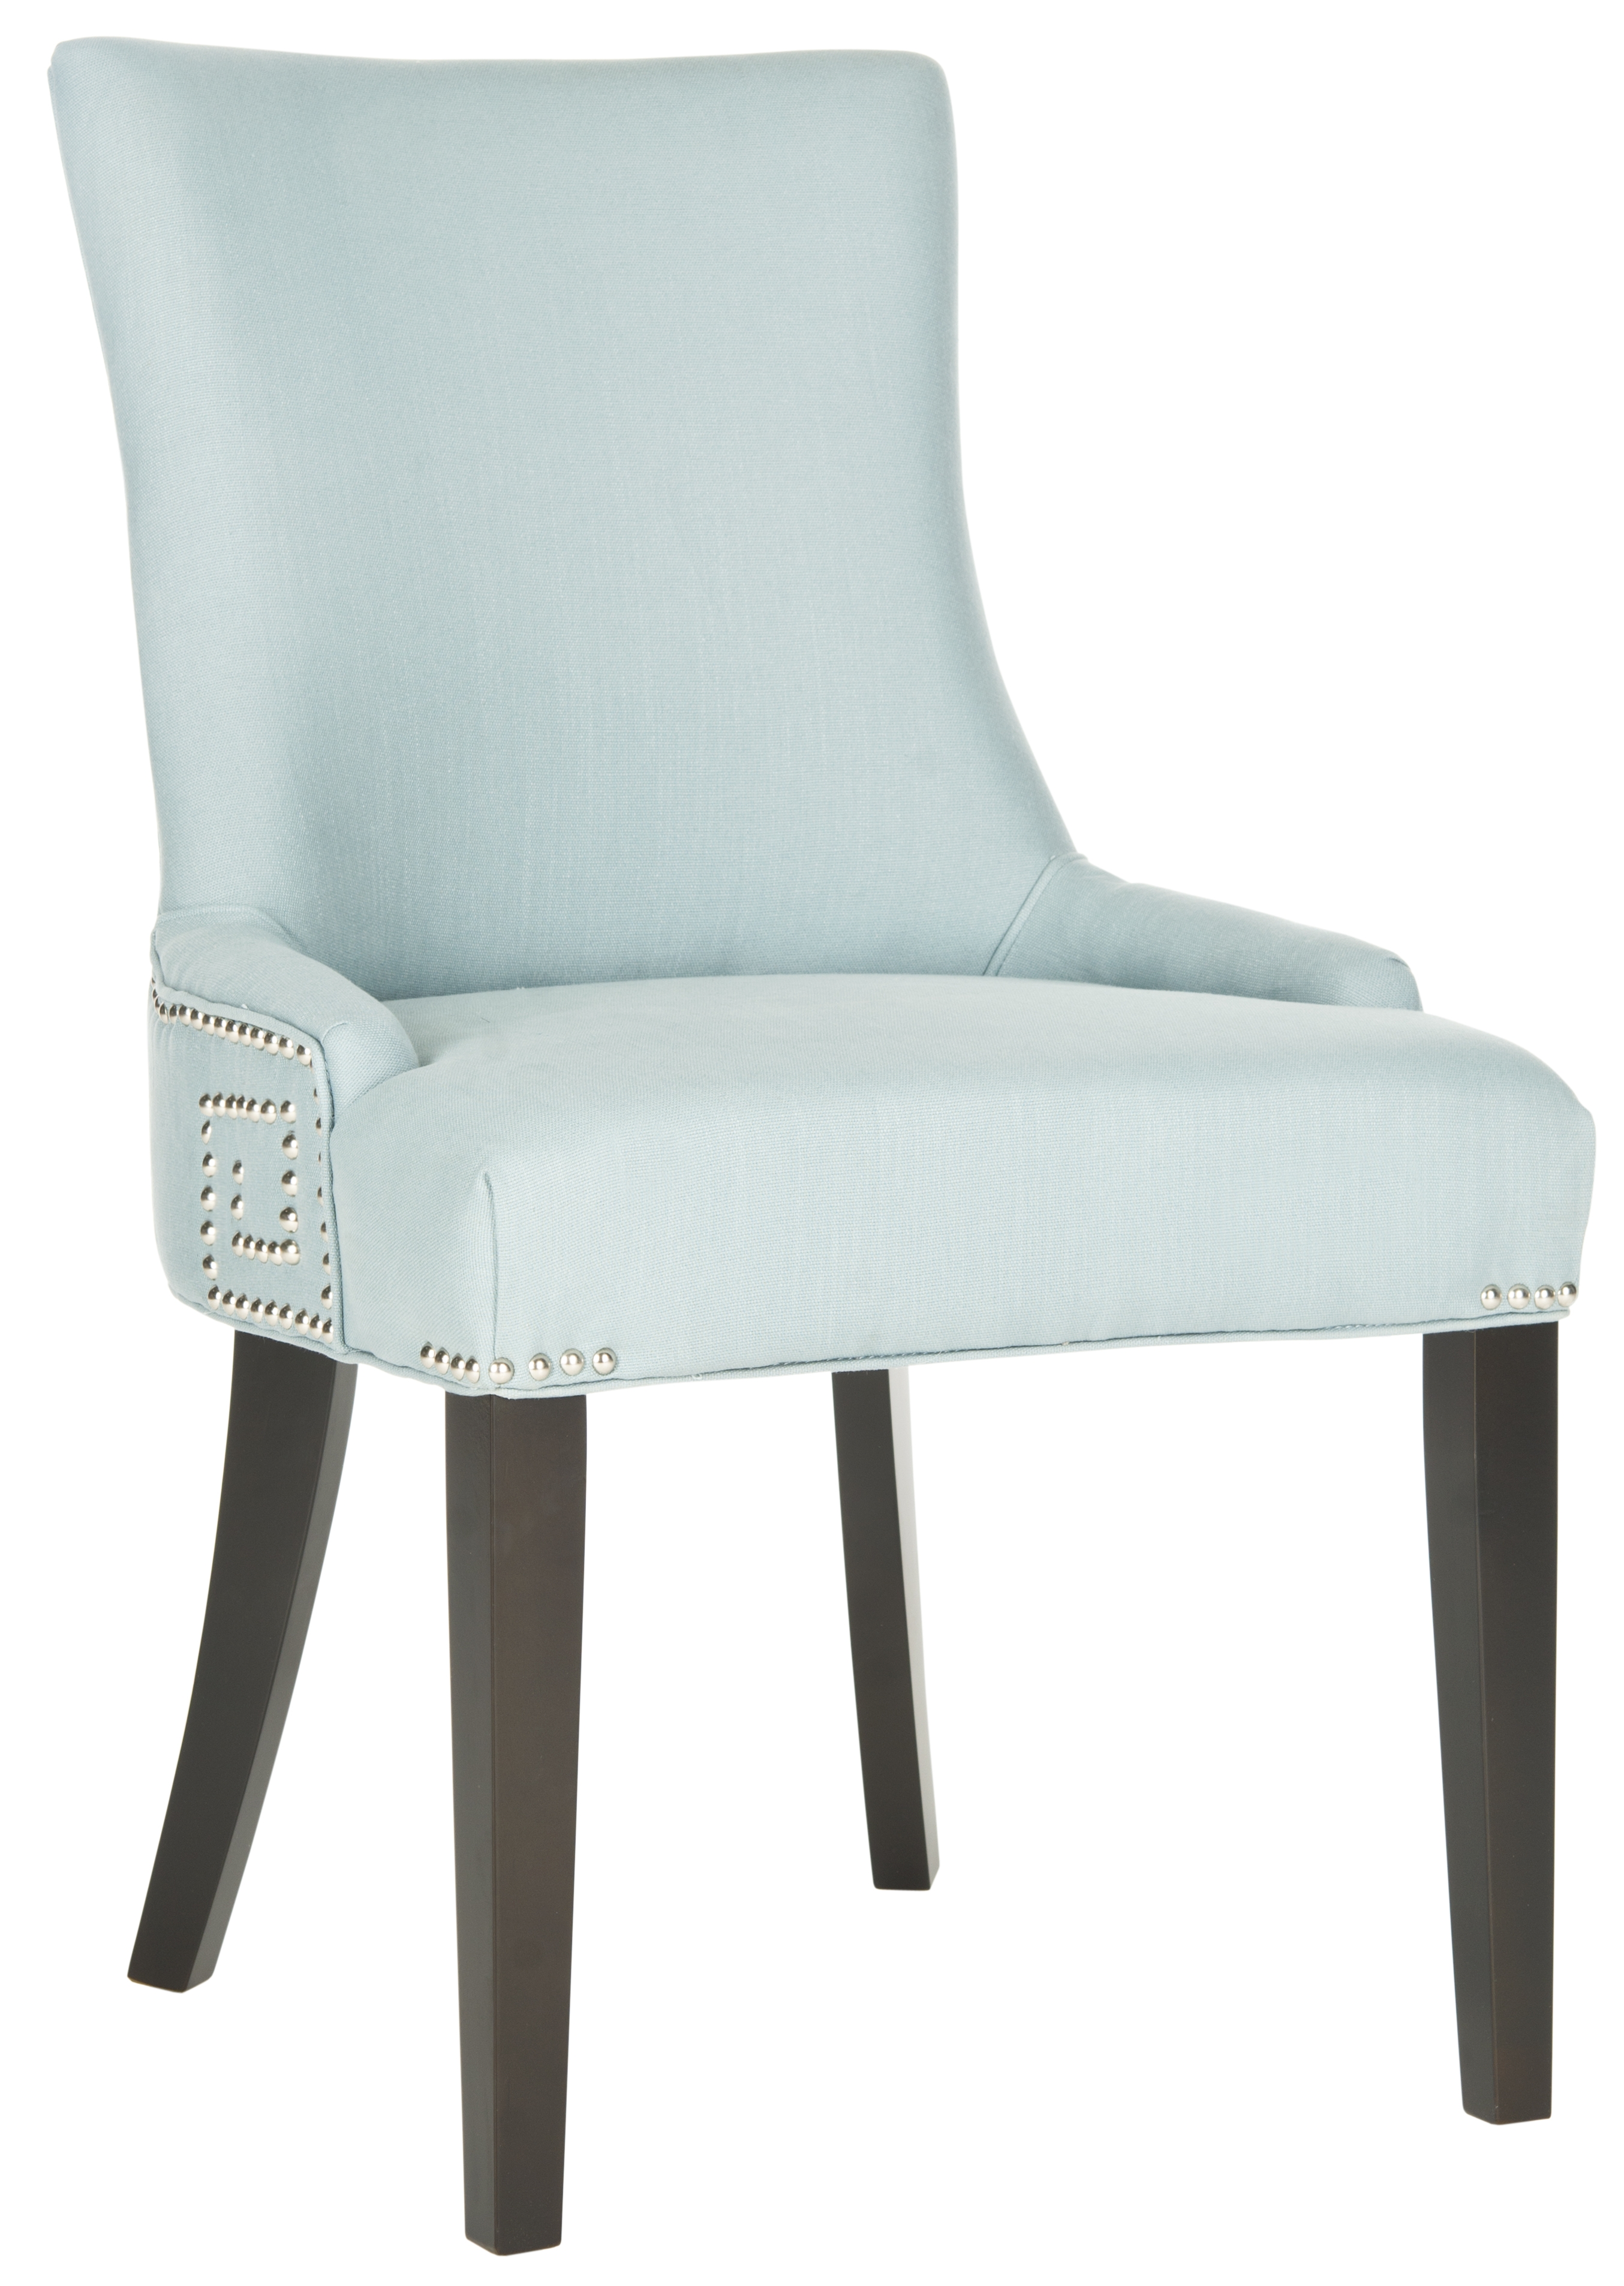 Gretchen 20''H Side Chair (Set Of 2) - Silver Nail Heads - Light Blue/Espresso - Arlo Home - Image 1